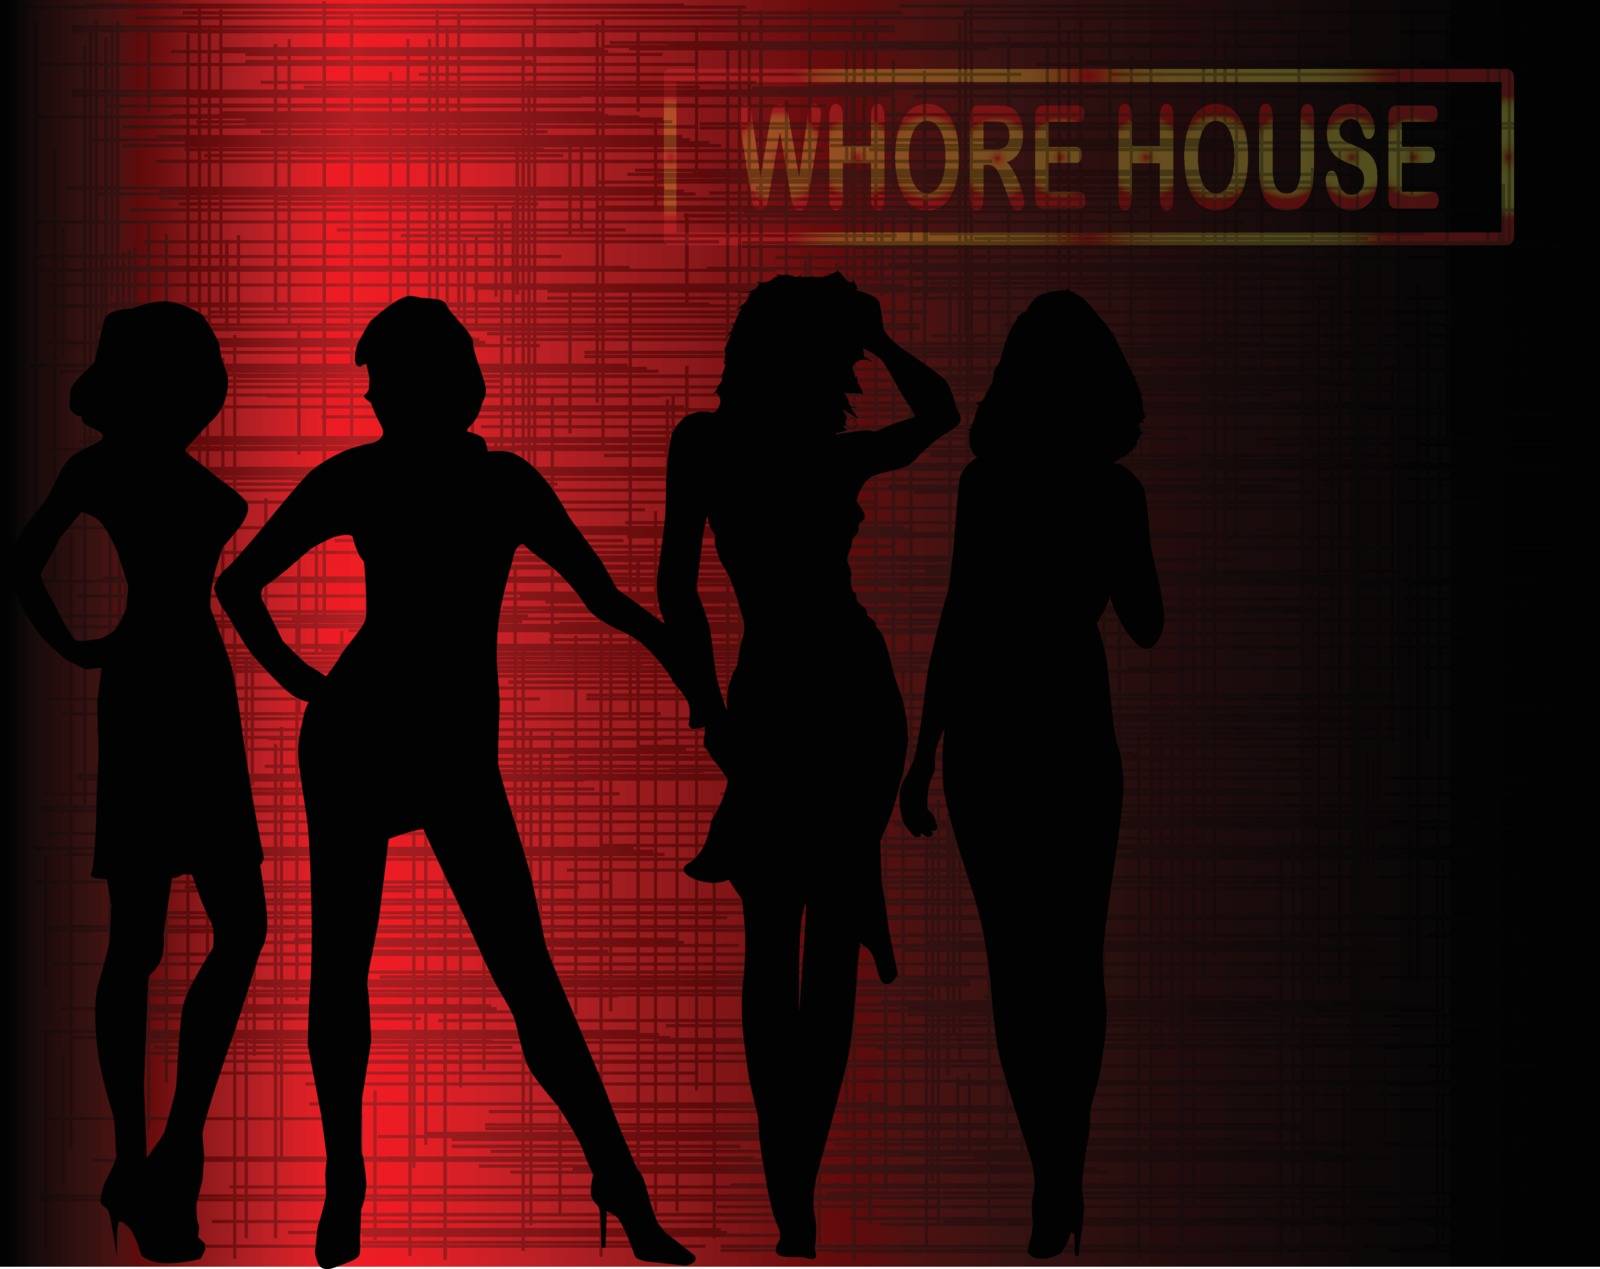 A group of prostitutes gathering below a whore house sign